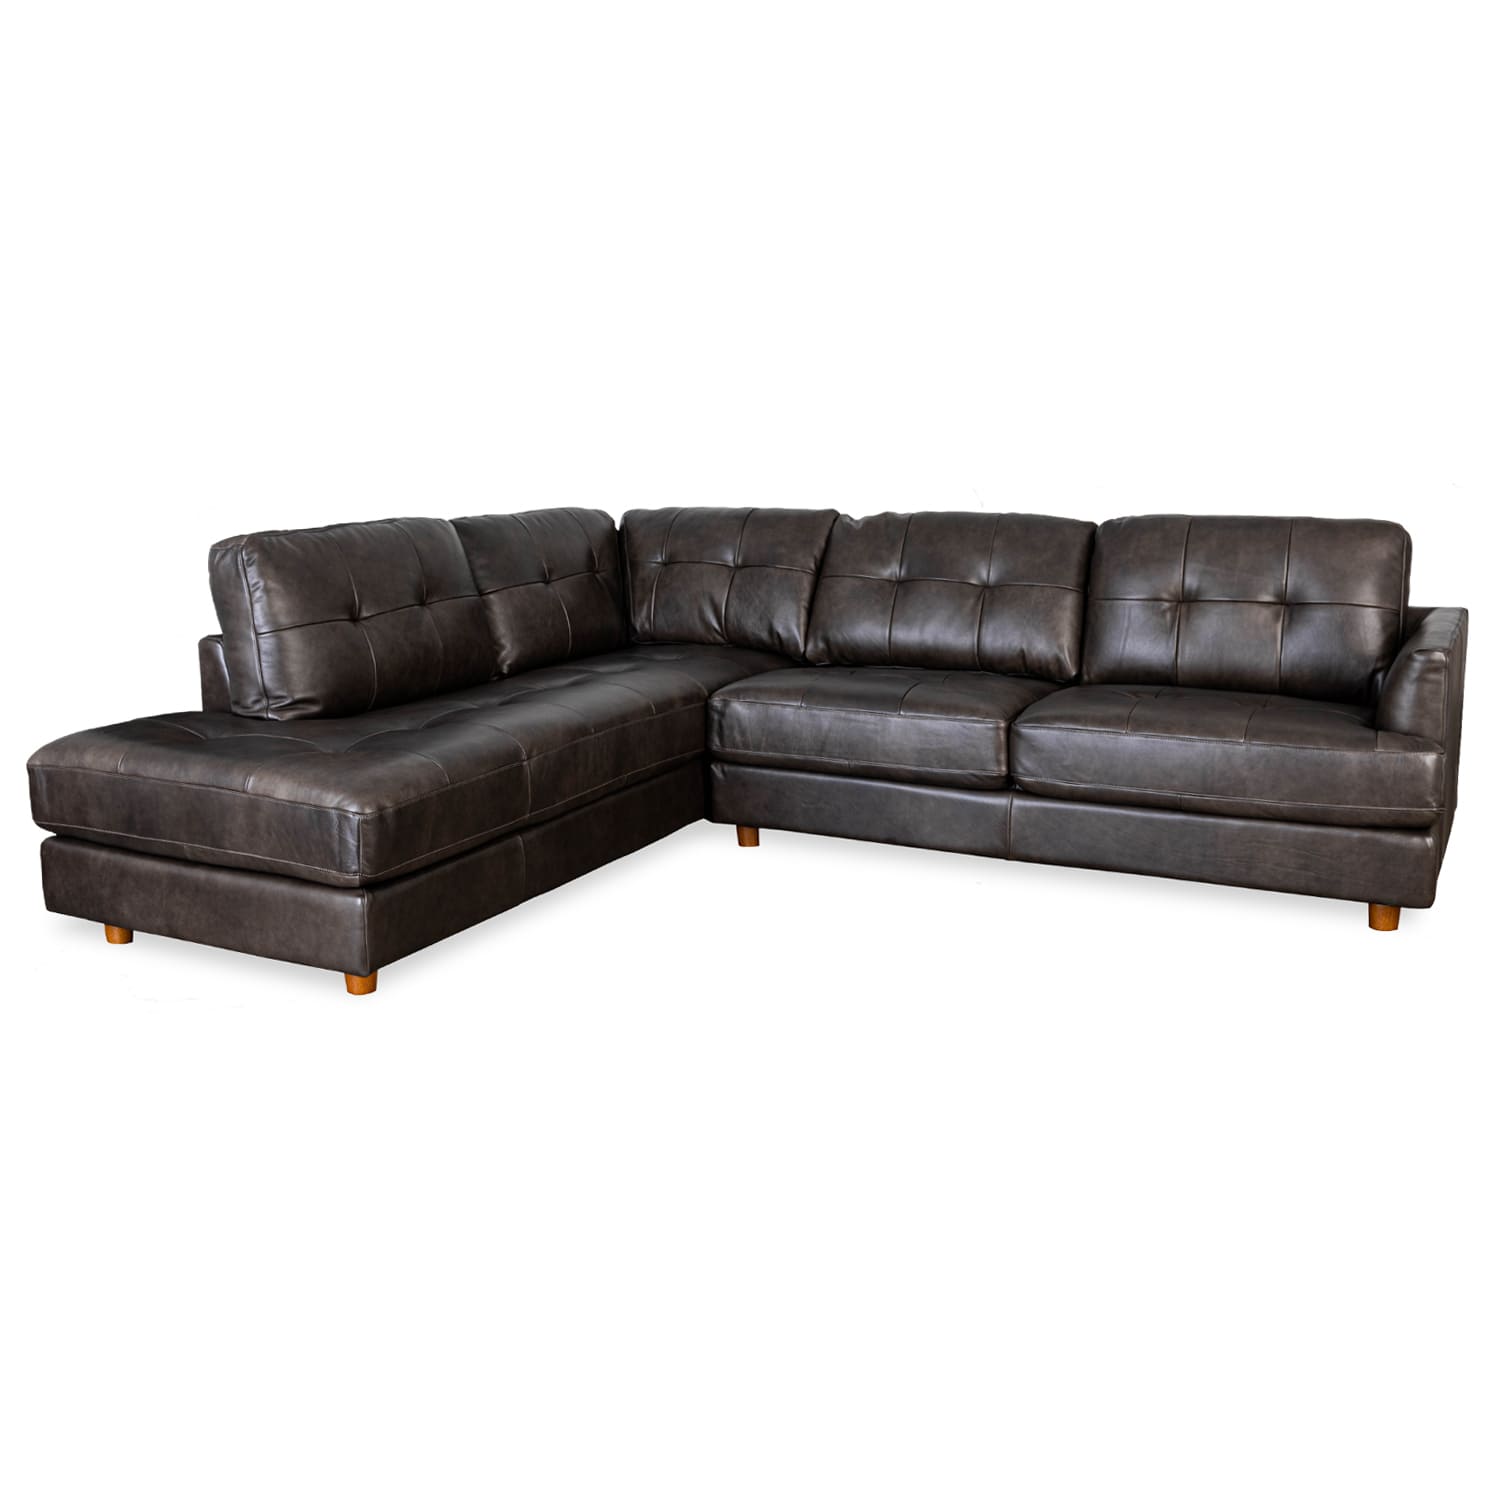 Harmony Leather Left Side Facing Chaise Lounge